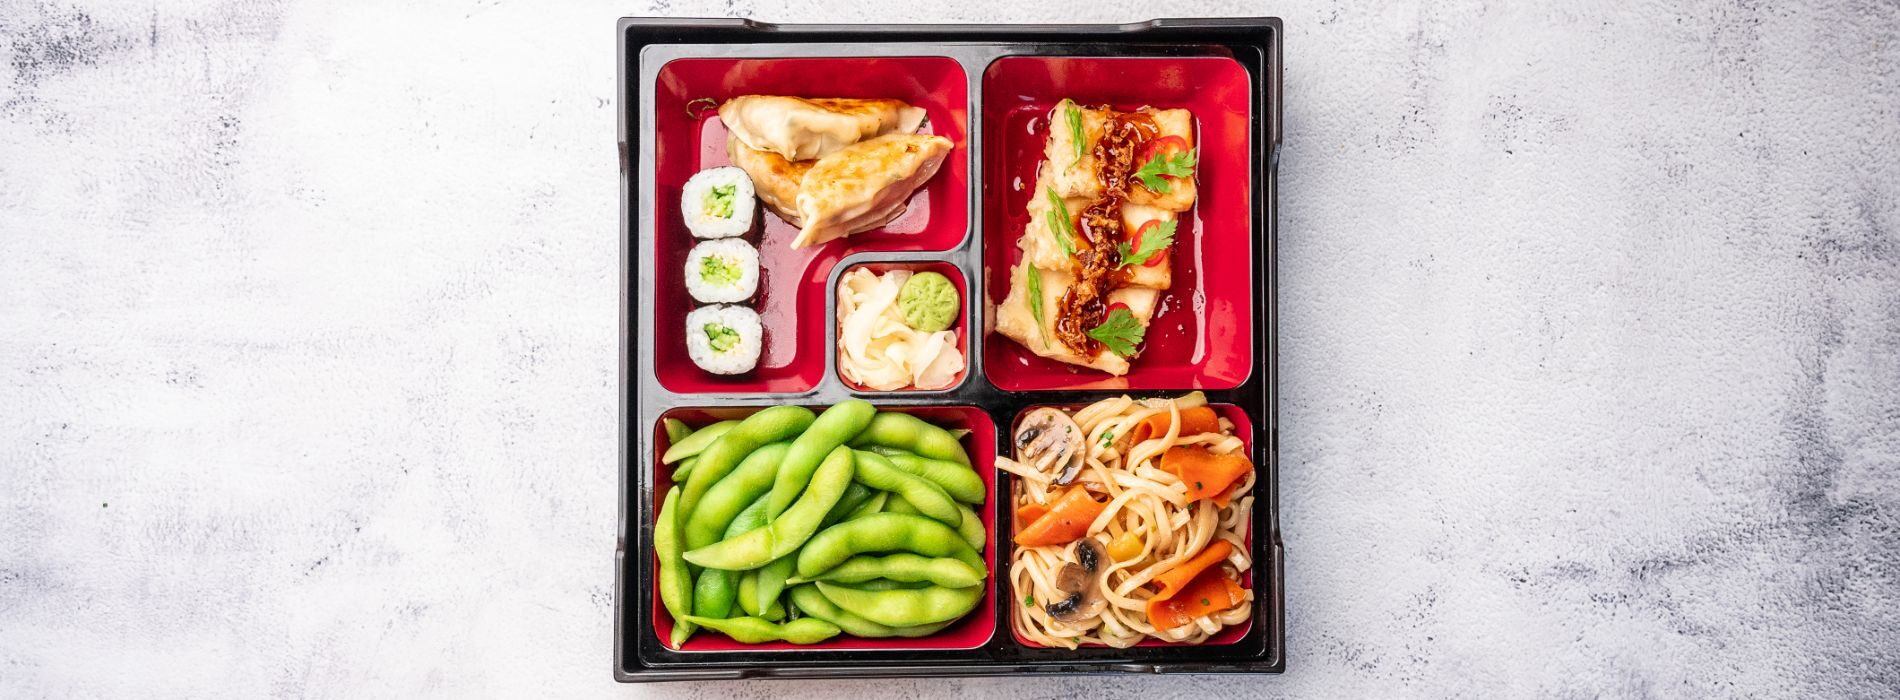 Home Delivery Iftar & Deal of the Week: Sushi Art Ramadan Bento Boxes 